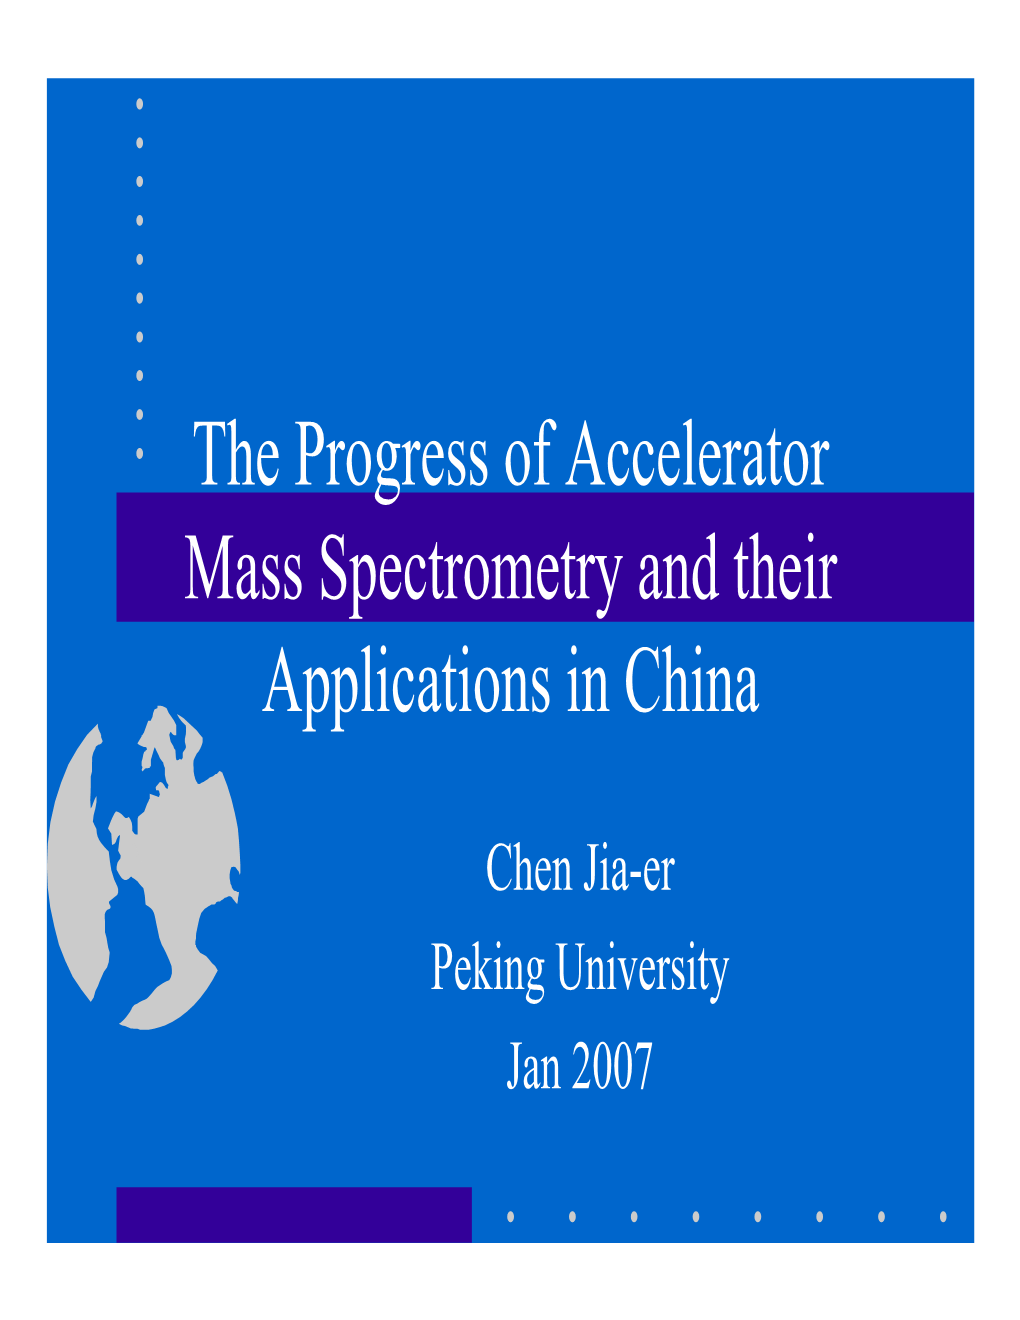 The Progress of Accelerator Mass Spectrometry and Their Applications in China